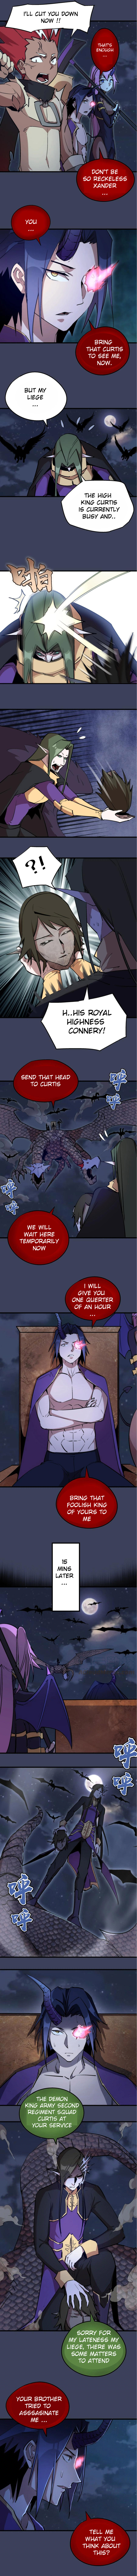 I'm Not The Overlord! - Page 2